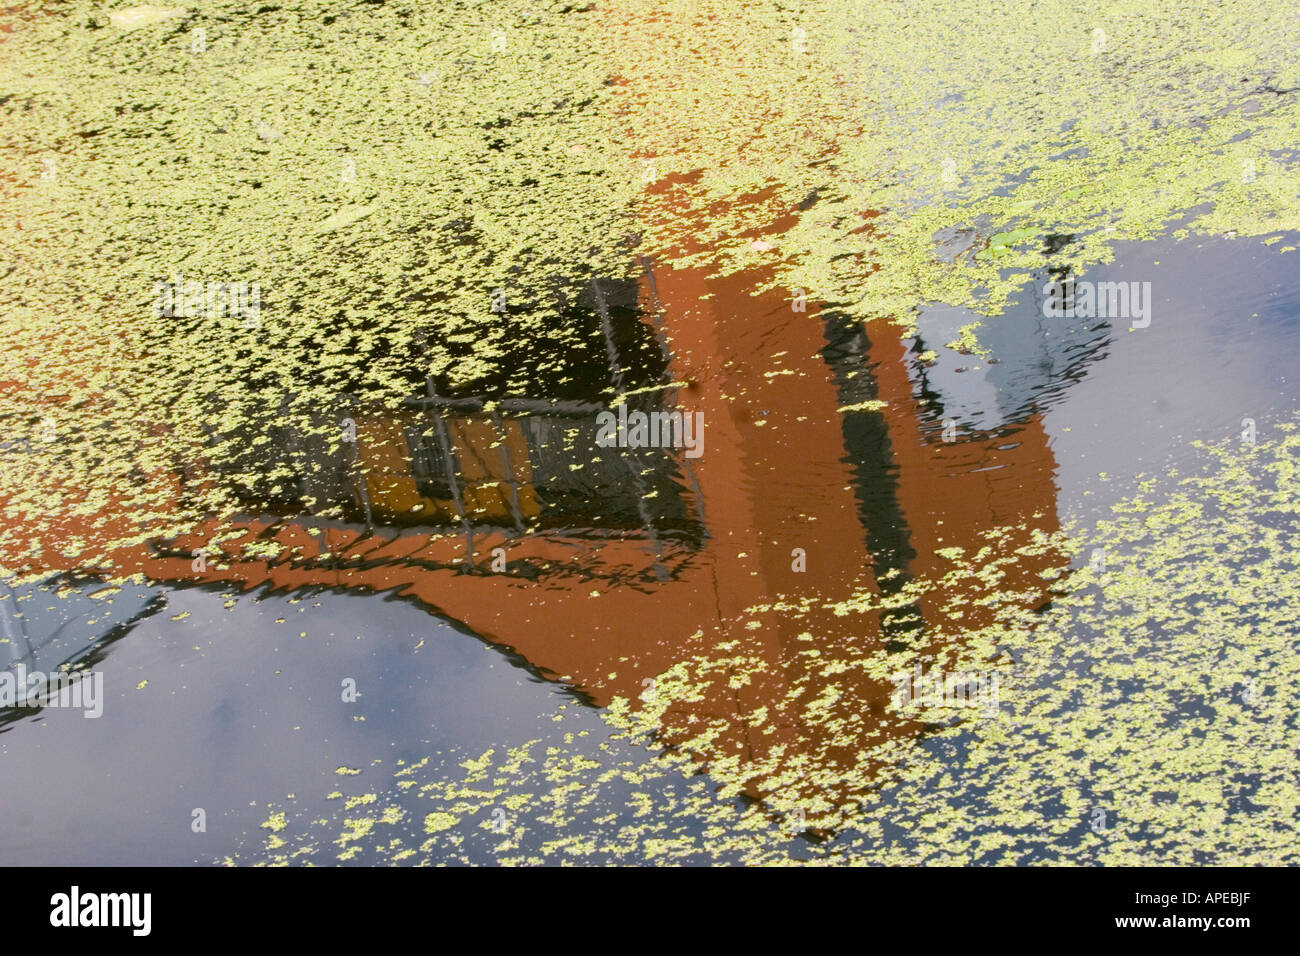 Reflection in water with duck weed surrounding Stock Photo